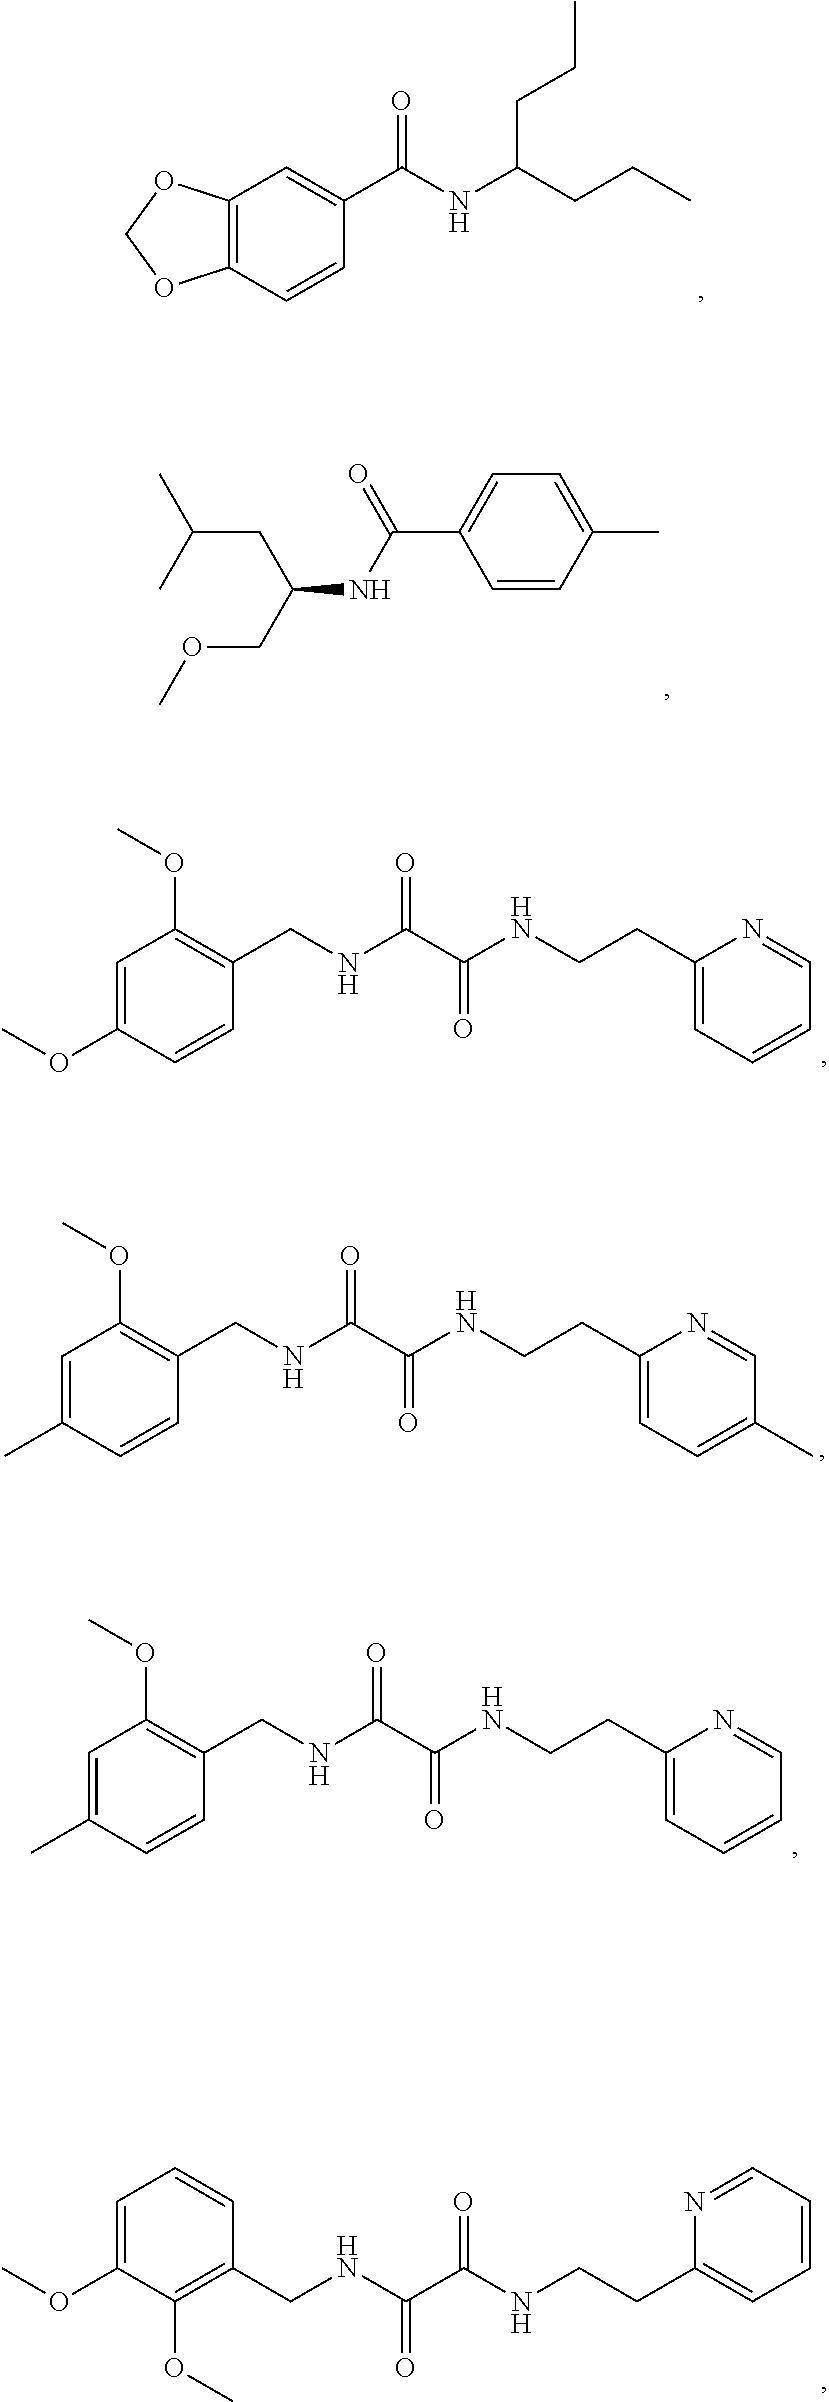 Compositions Incorporating an Umami Flavor Agent